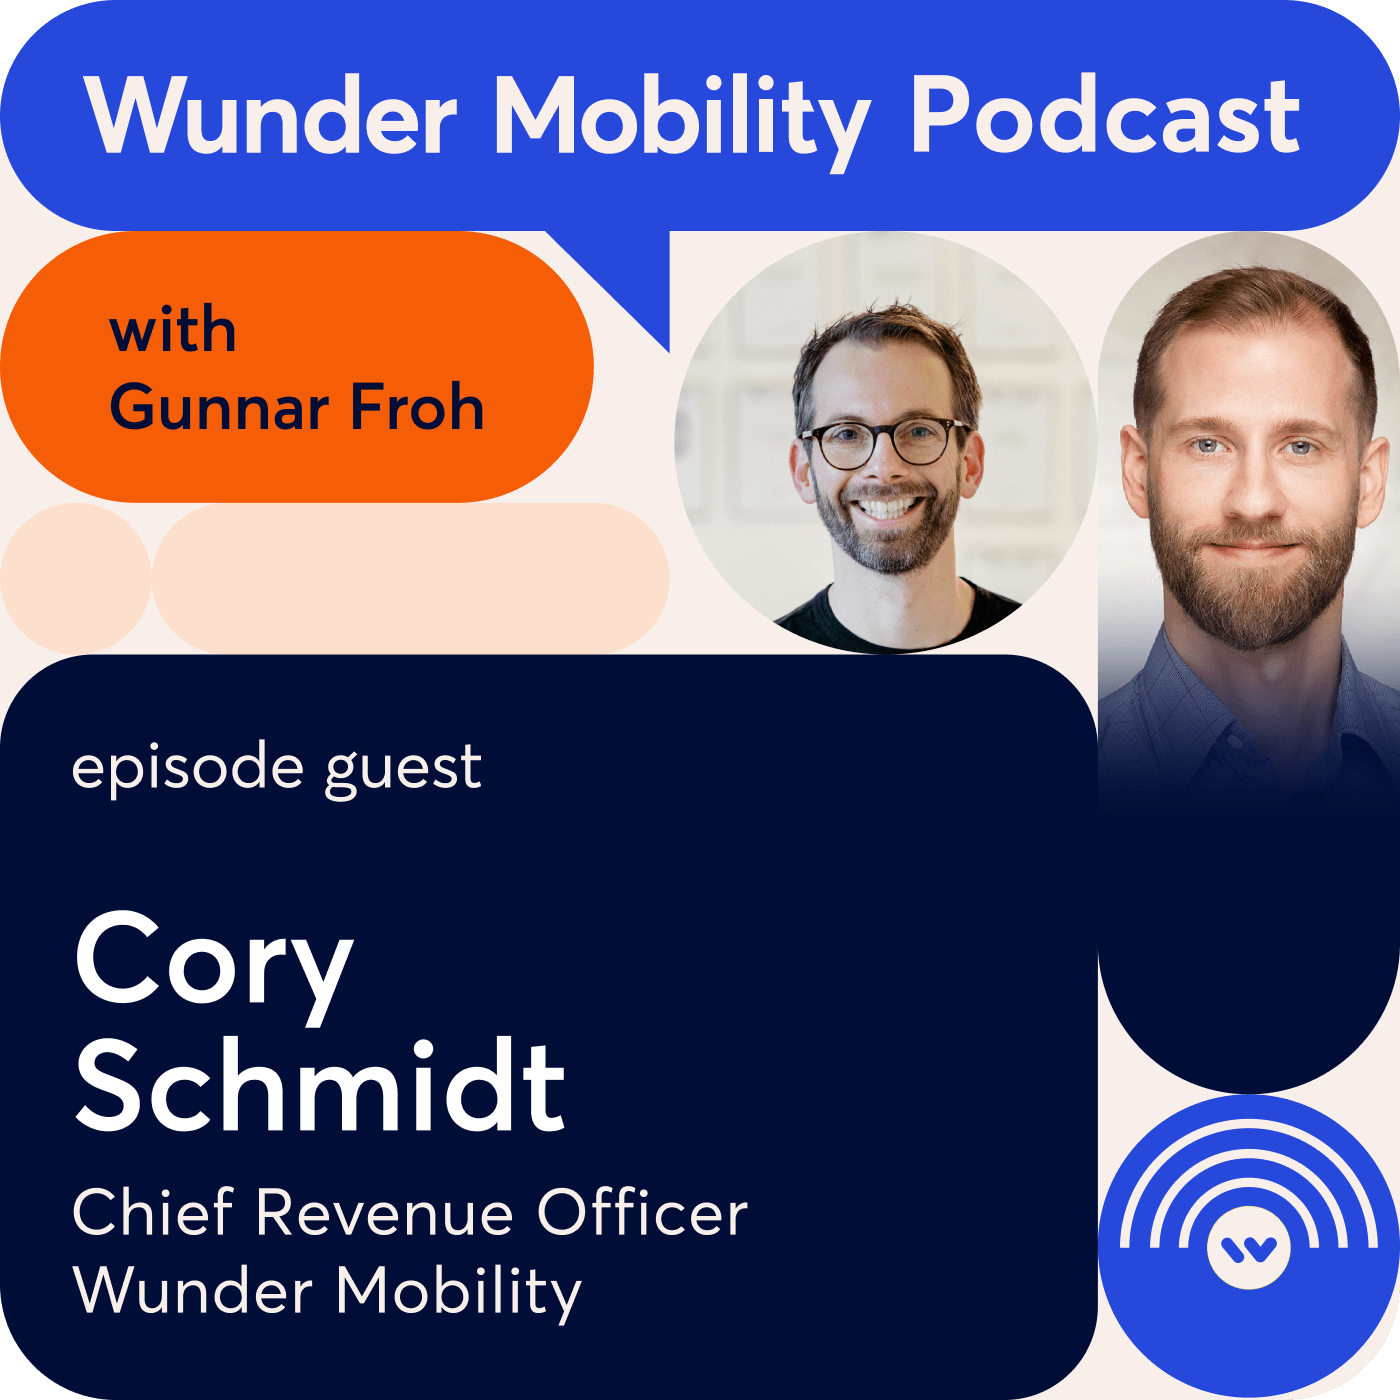 Wunder Mobility Podcast template featuring Cory Schmidt and Gunnar Froh in bubble shaped image elements.